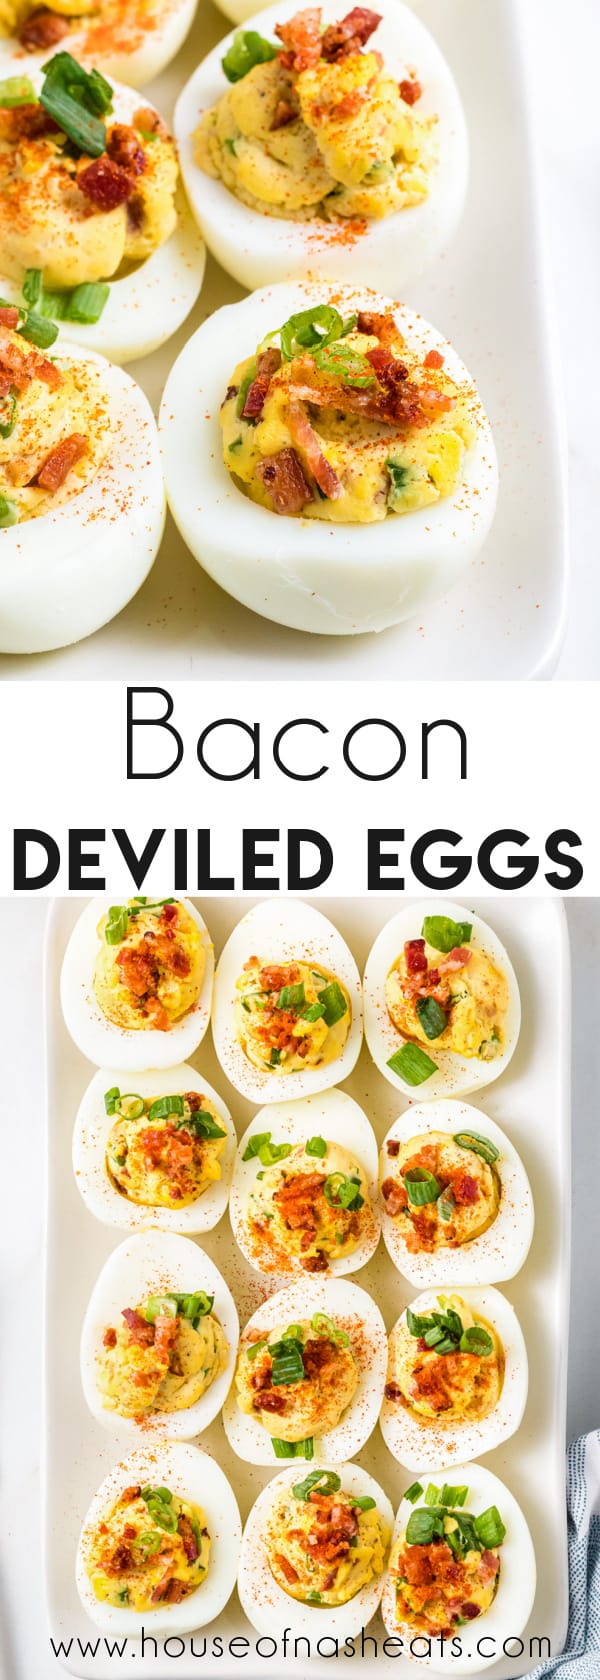 A collage of images of deviled eggs with bacon and green onions with text overlay.